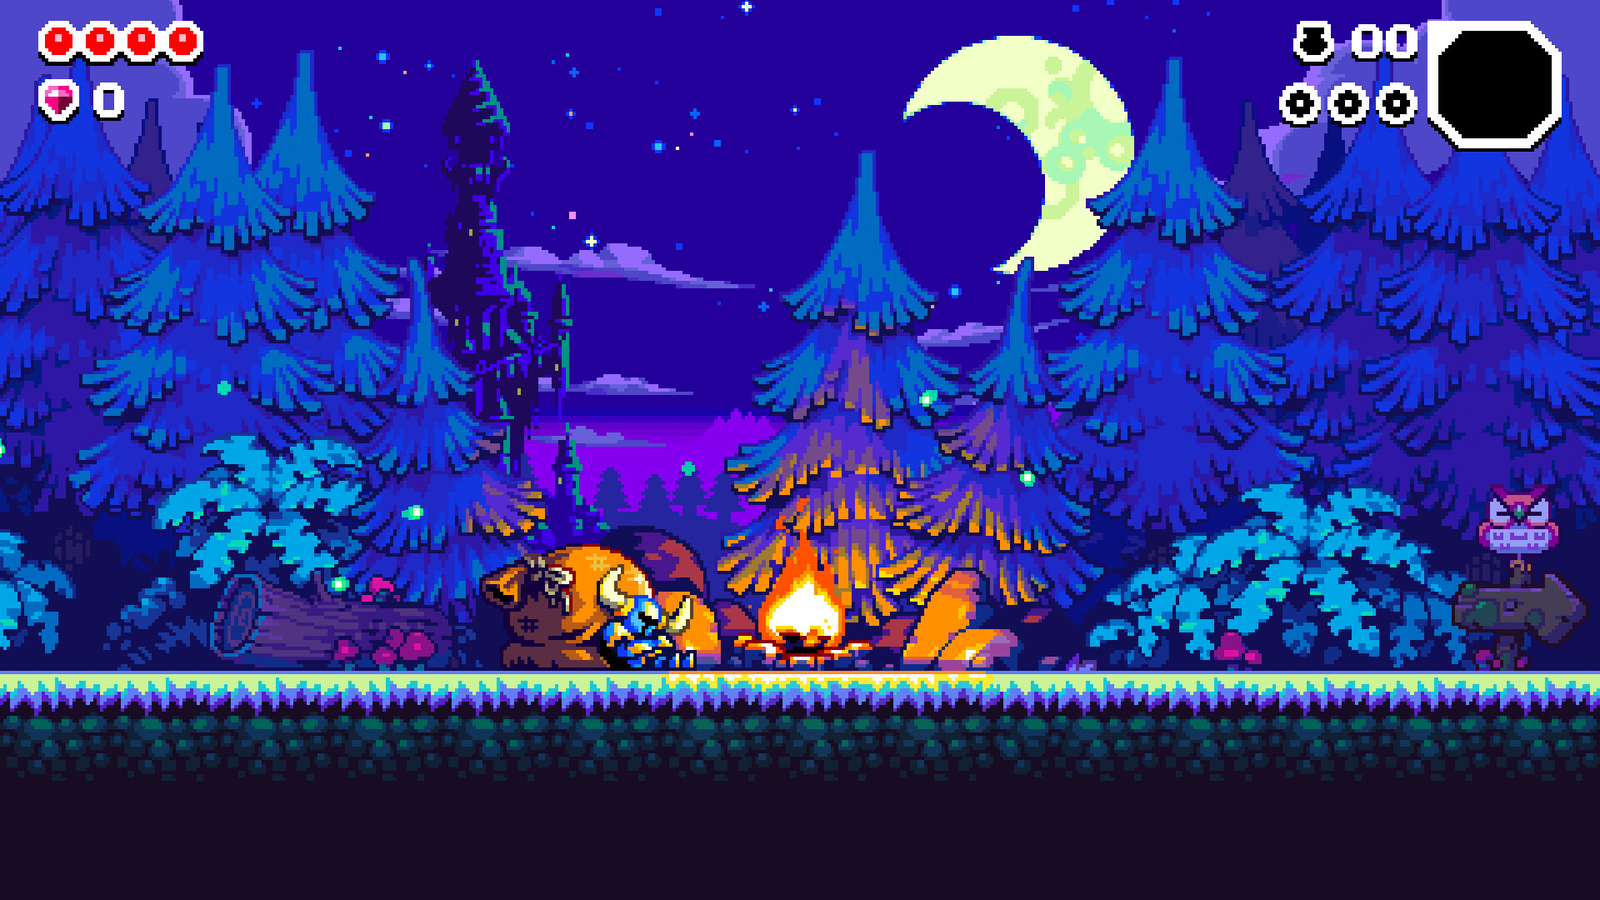 Shovel Knight Dig Releases on September 23rd! - Yacht Club Games